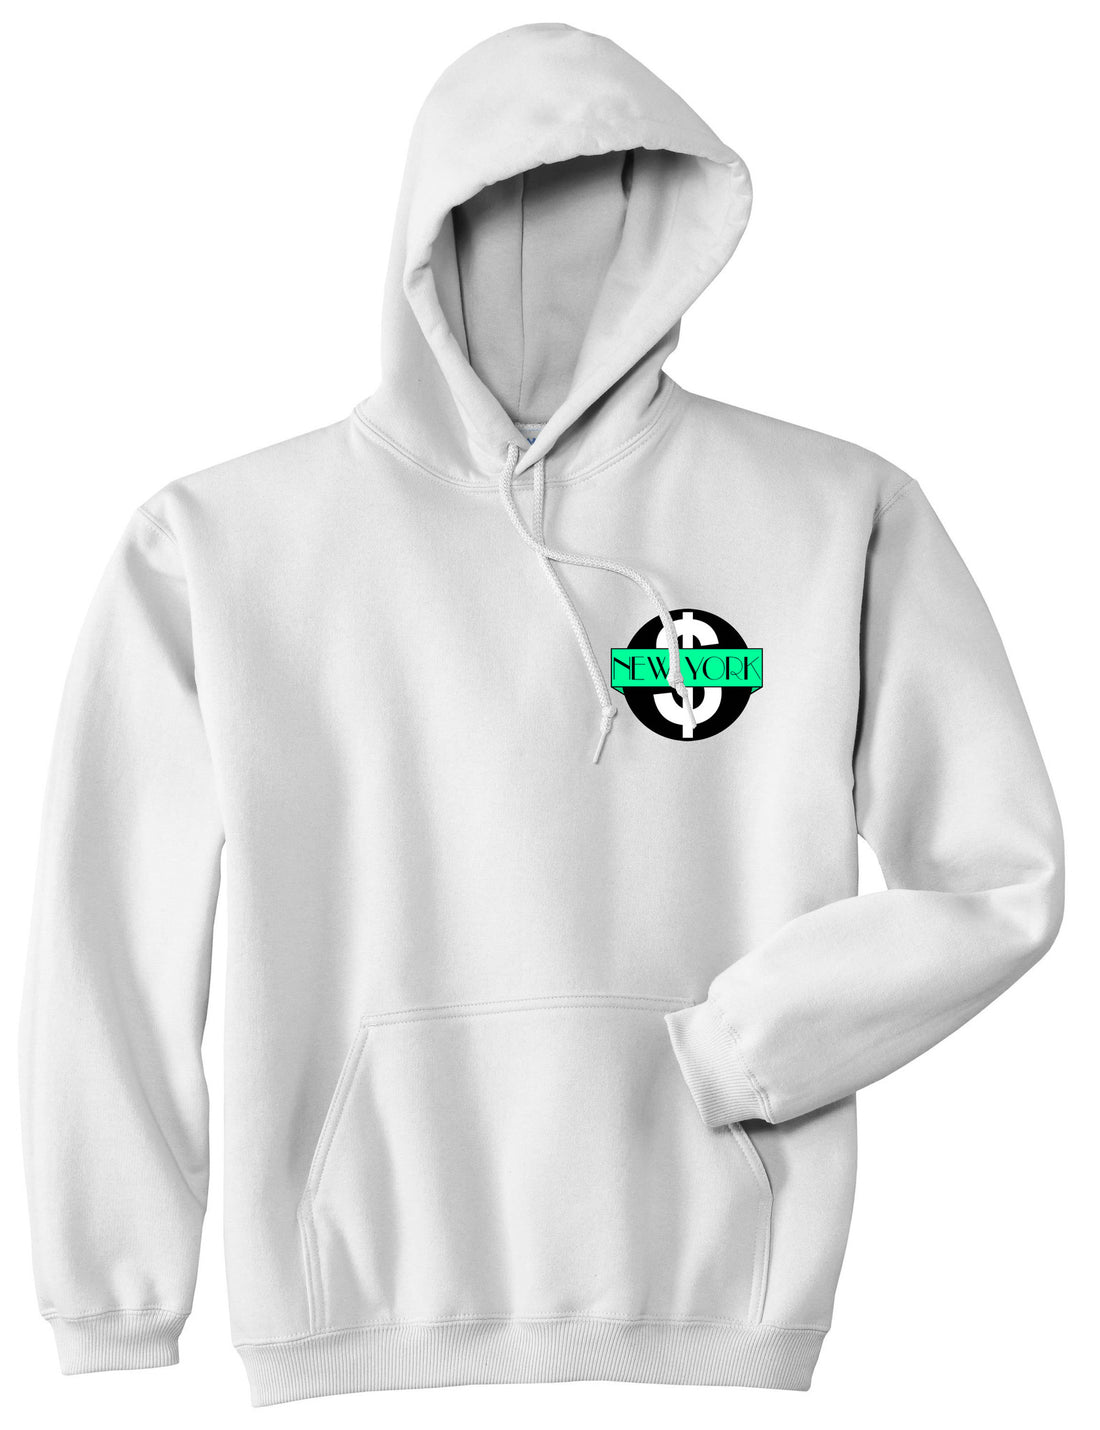 New York Mint Chest Logo Boys Kids Pullover Hoodie Hoody in White By Kings Of NY